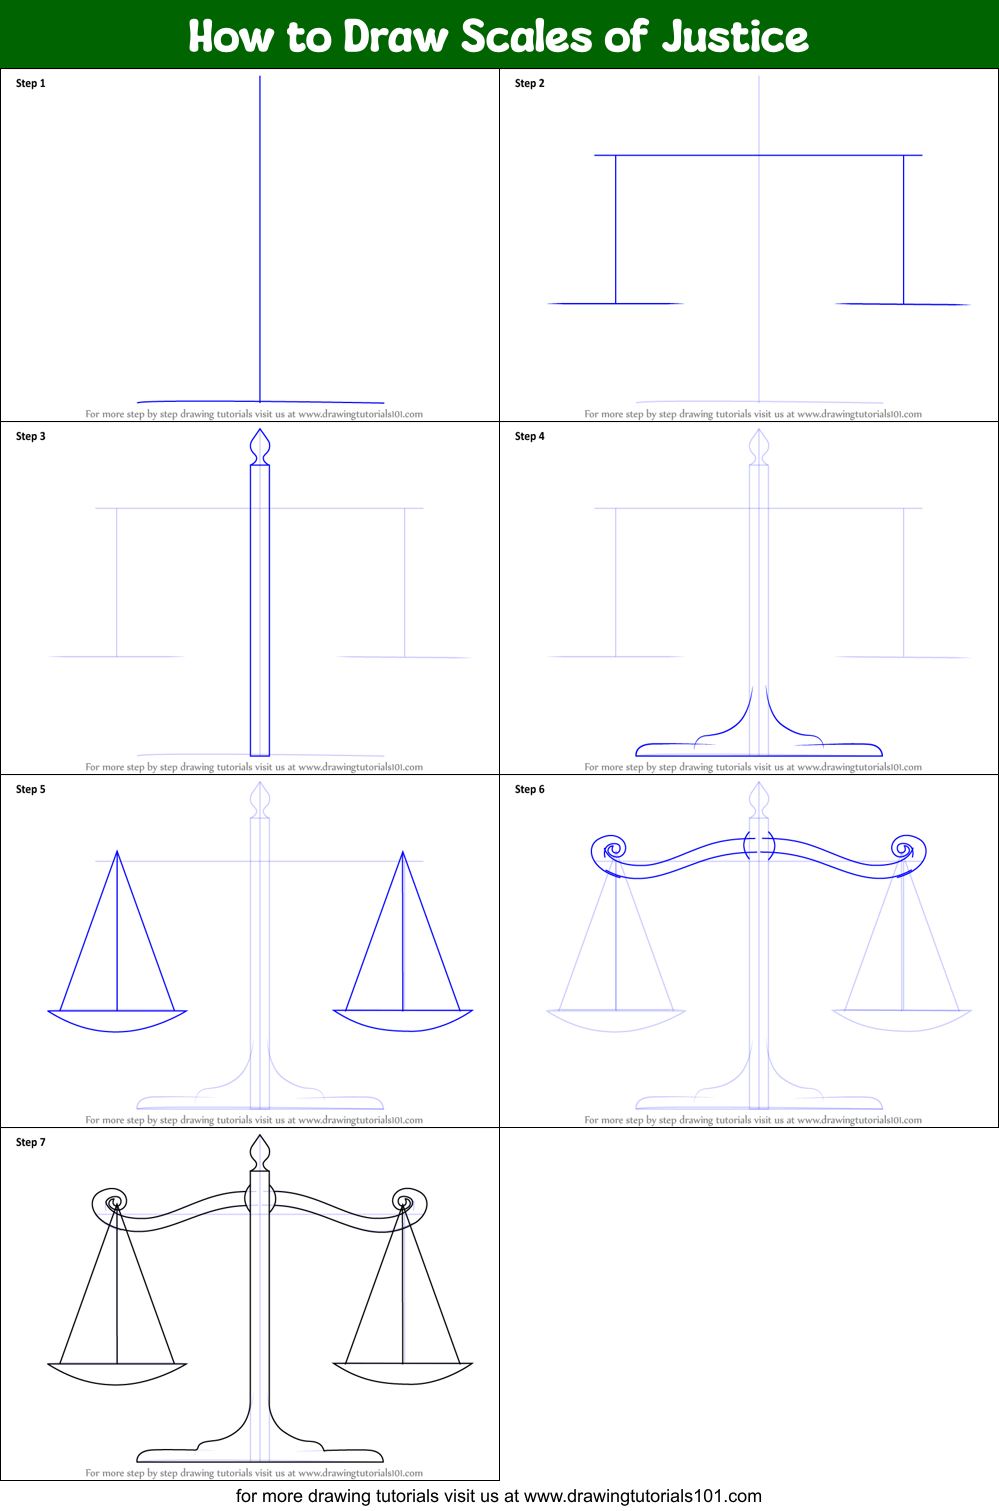 How to Draw Scales of Justice printable step by step drawing sheet